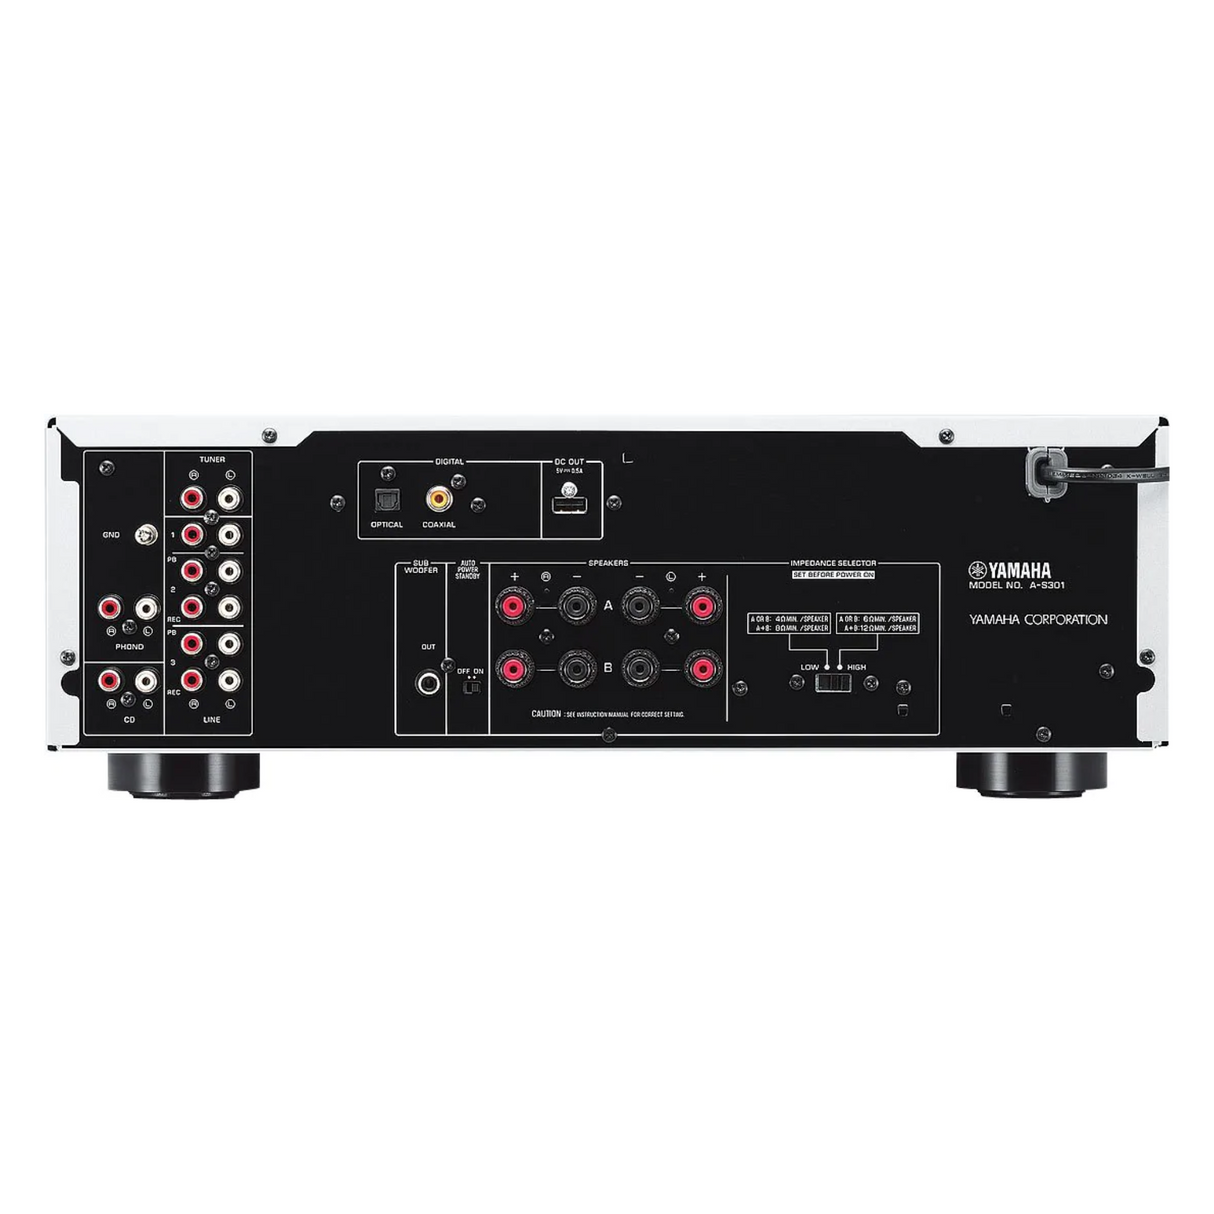 Yamaha A-S301 Integrated Amplifier with DAC